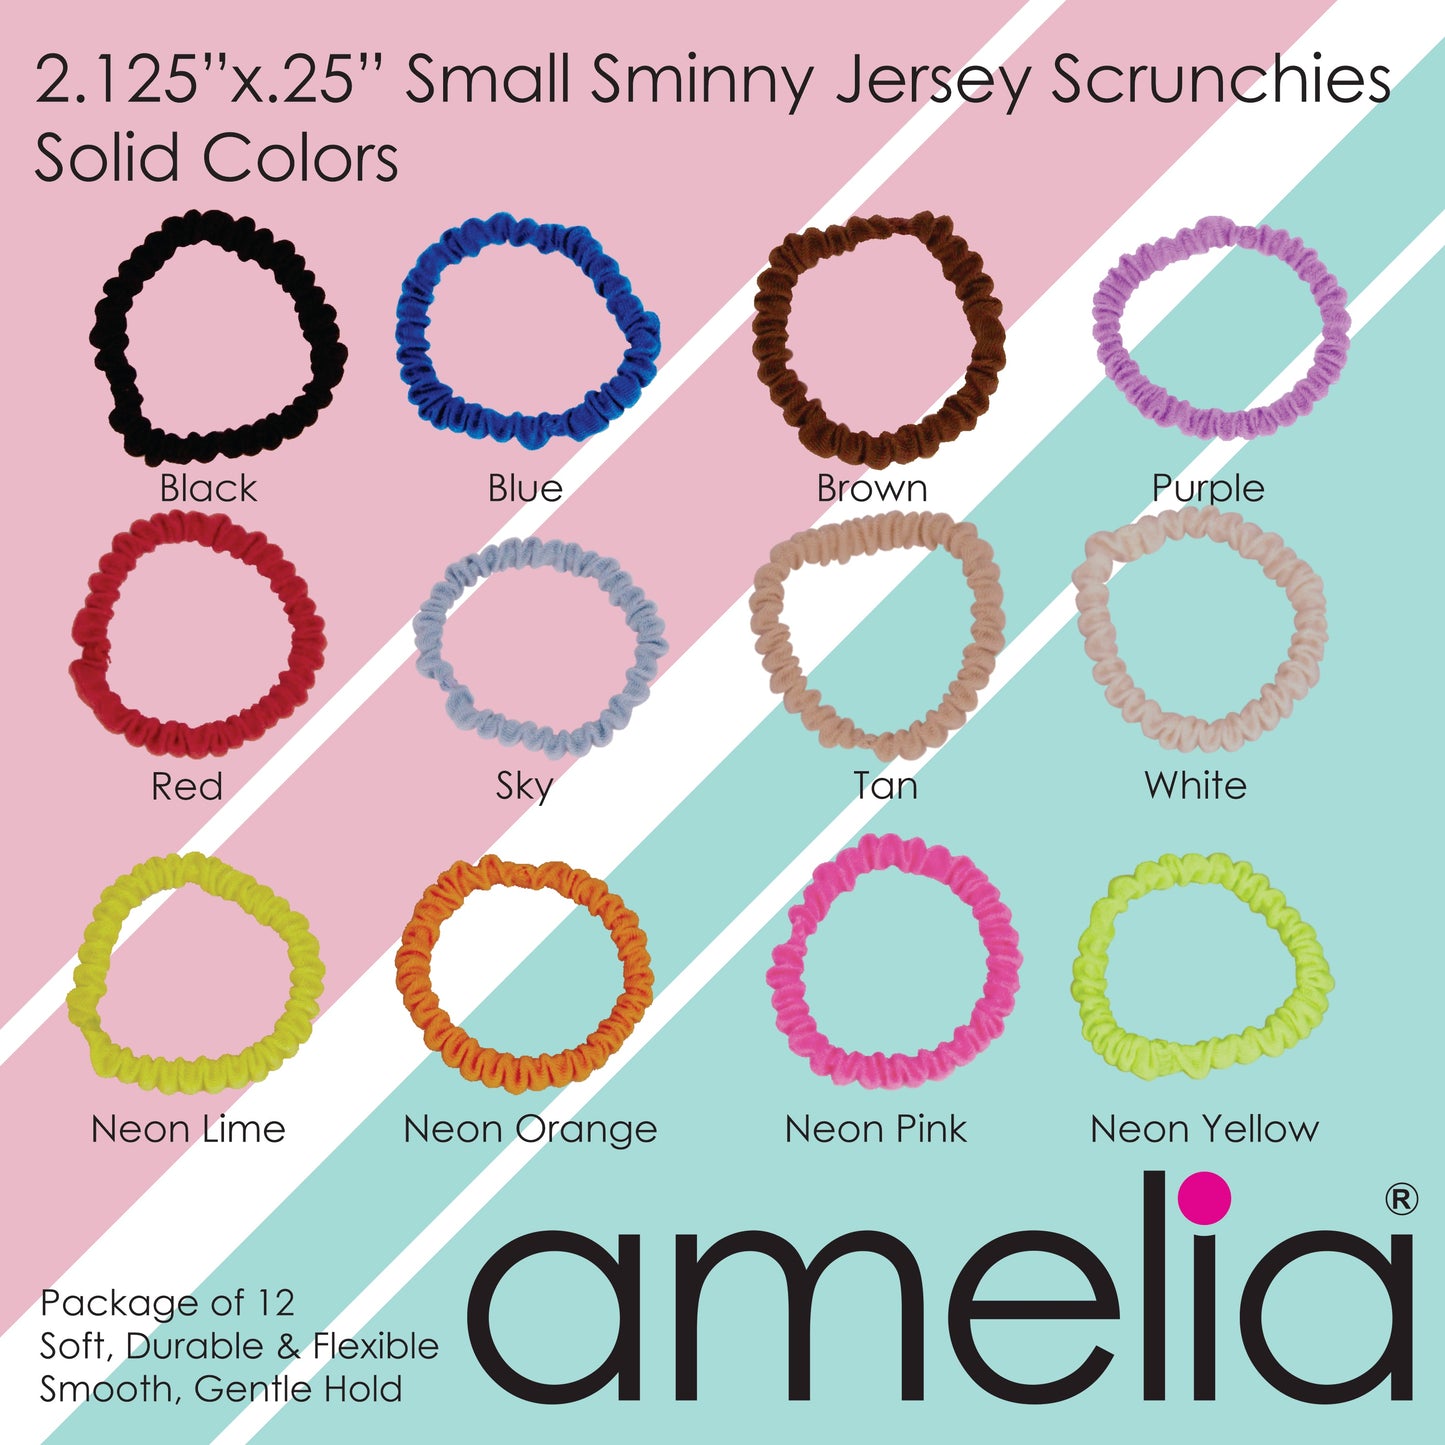 Amelia Beauty, Neon Pink Skinny Jersey Scrunchies, 2.125in Diameter, Gentle on Hair, Strong Hold, No Snag, No Dents or Creases. 12 Pack